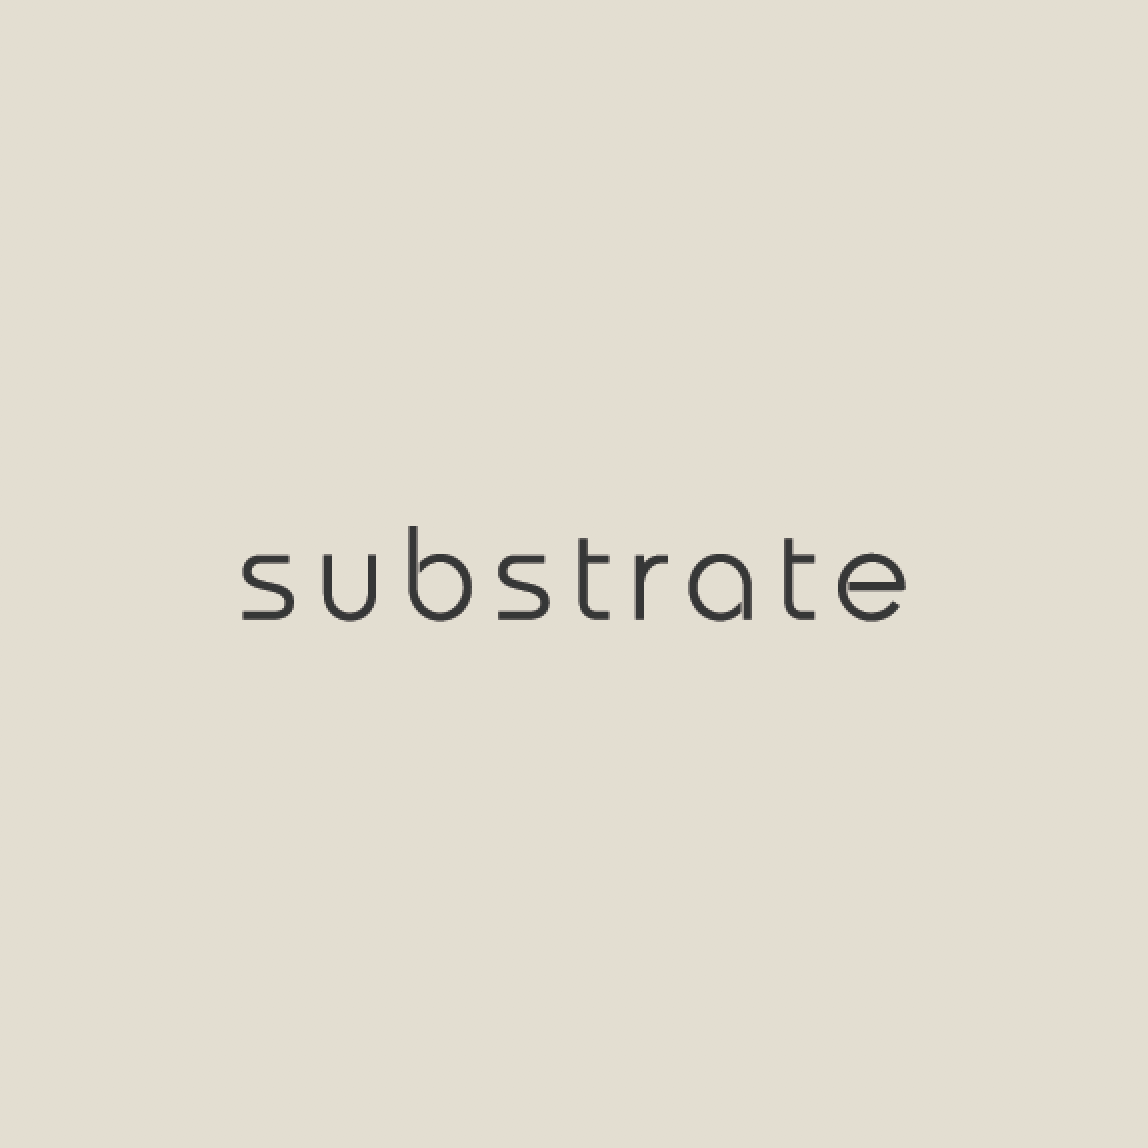 SUBSTRATE SQUARE B.jpg